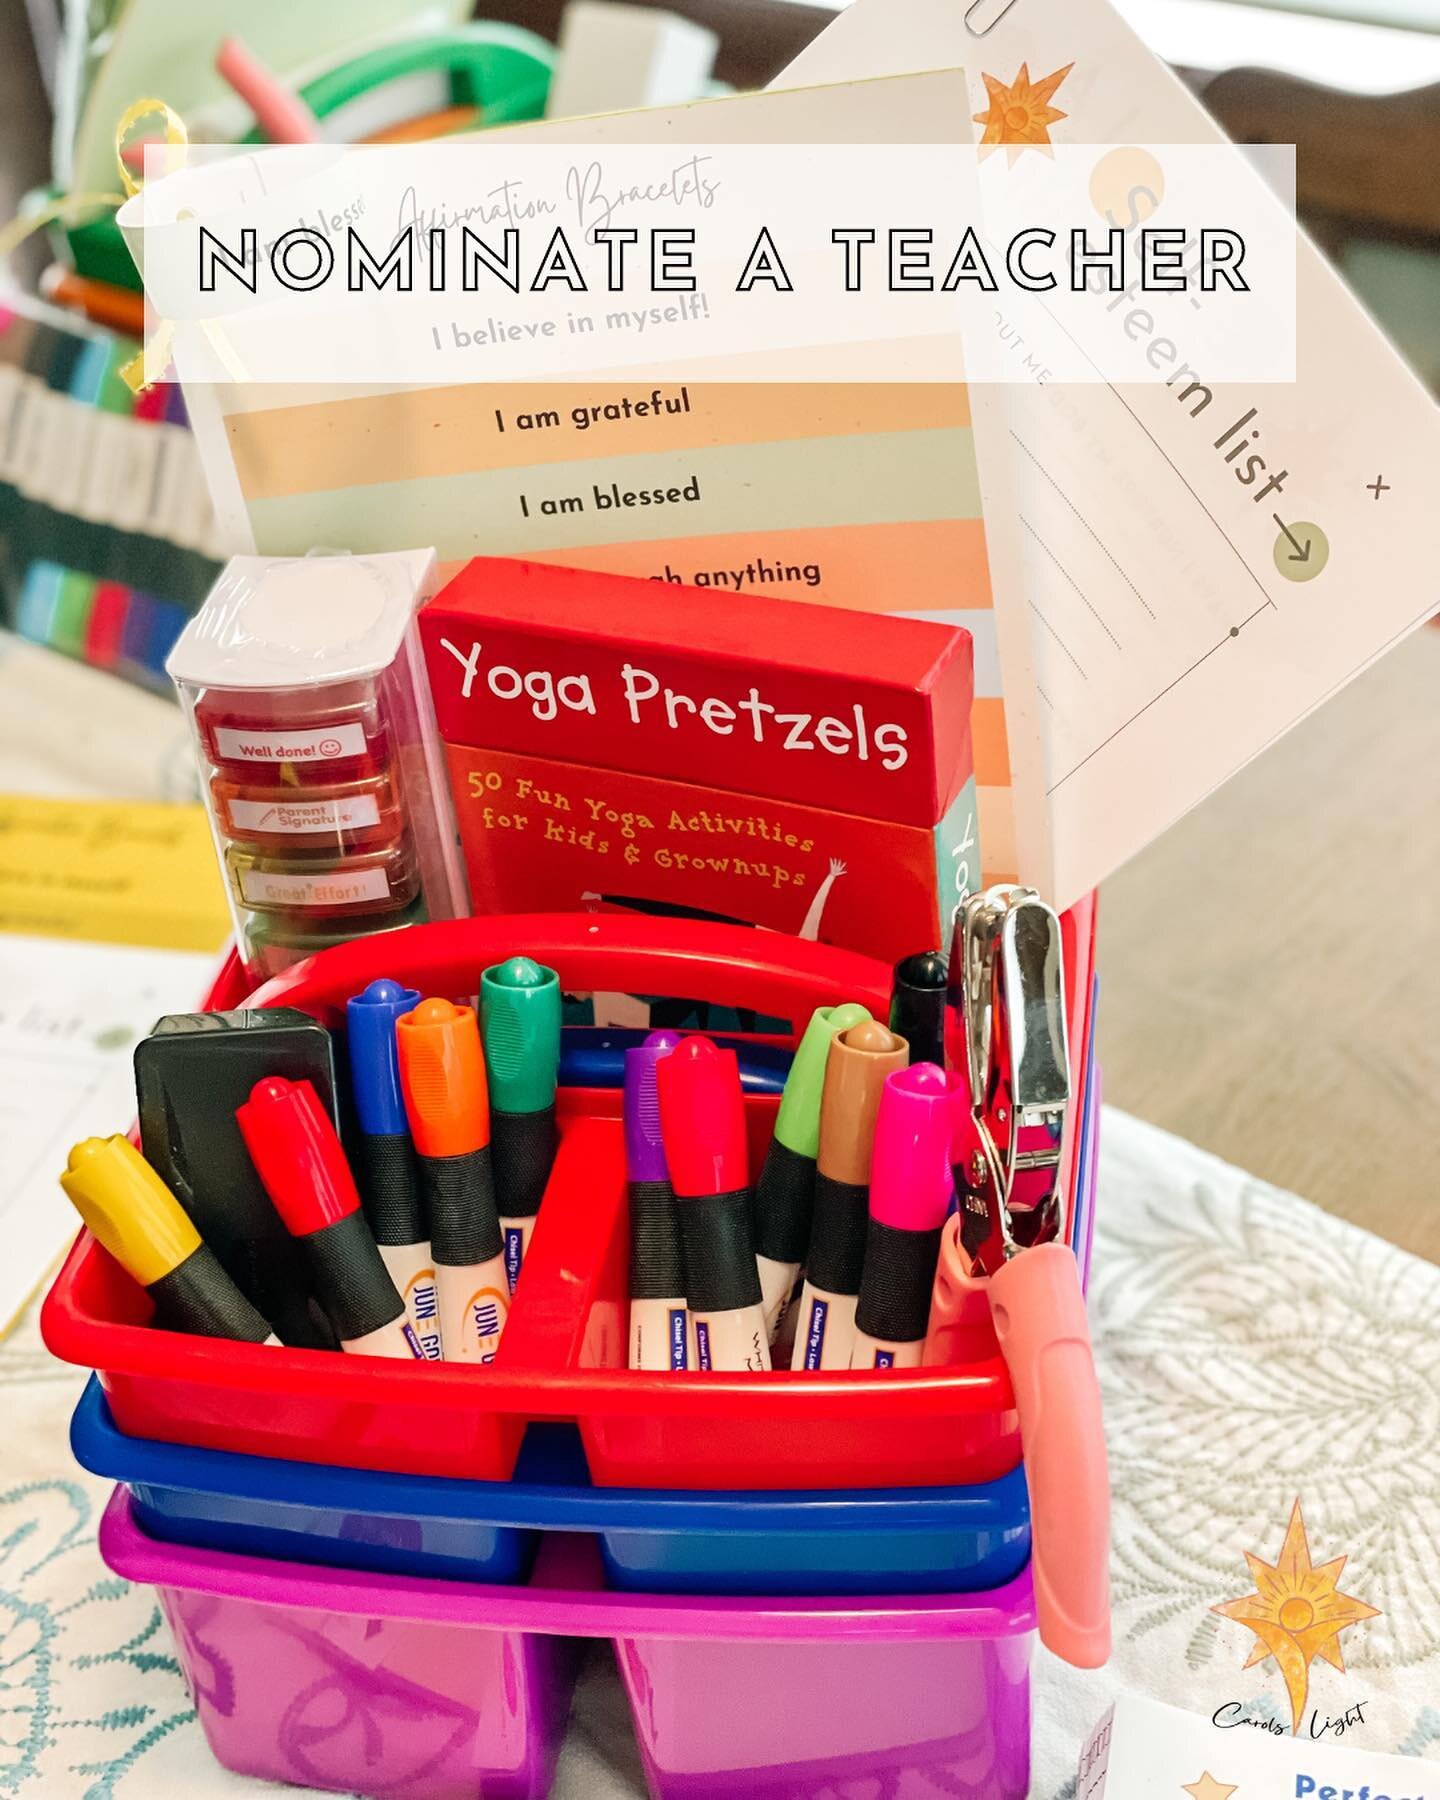 CALLING ALL FRIENDS &amp; FAMILY OF TEACHERS! 🧡

We&rsquo;re turning to YOU to find a teacher we can help. 

As the school year begins, teachers are looking for extra supplies. Do you know someone with a WishList of items they need? 📝

Last year, w